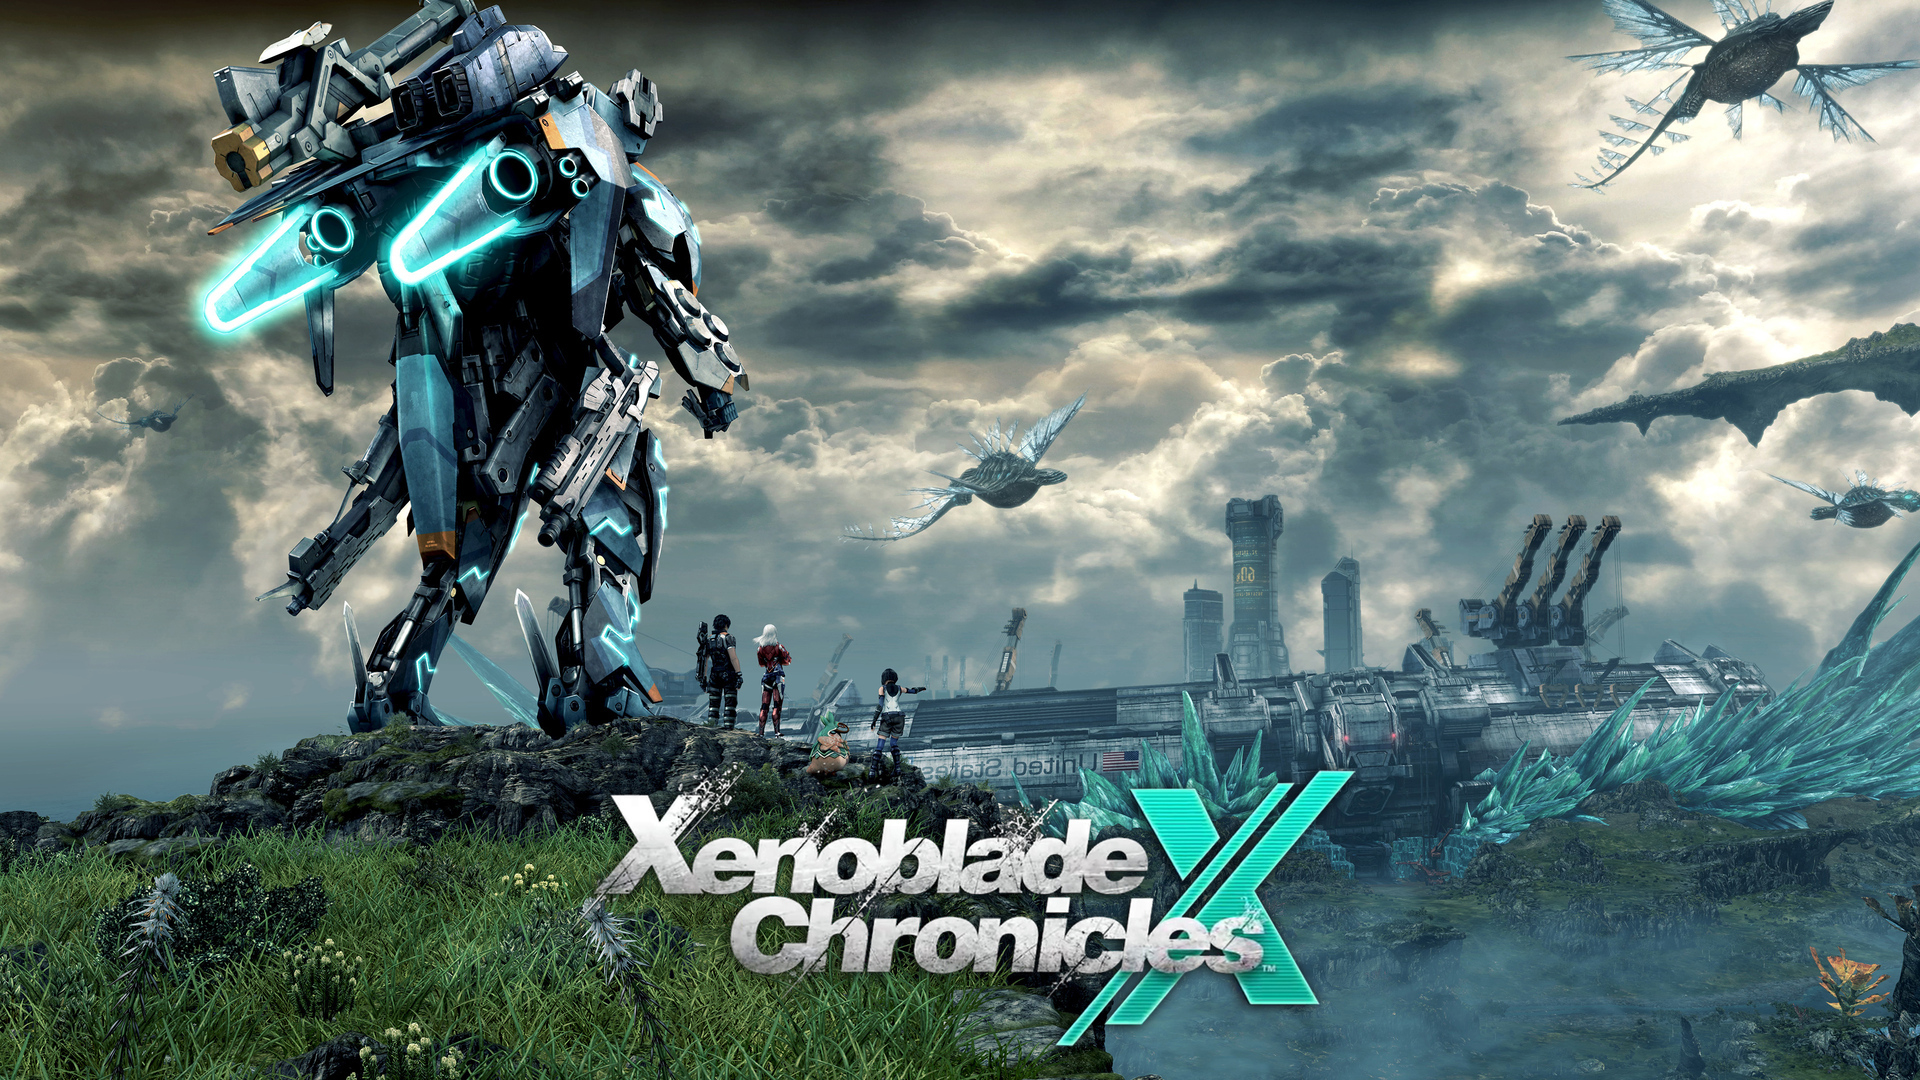 General 1920x1080 Xenoblade Chronicles Xenoblade Chronicles X anime games Wii U video game art mechs clouds sky video games grass video game characters